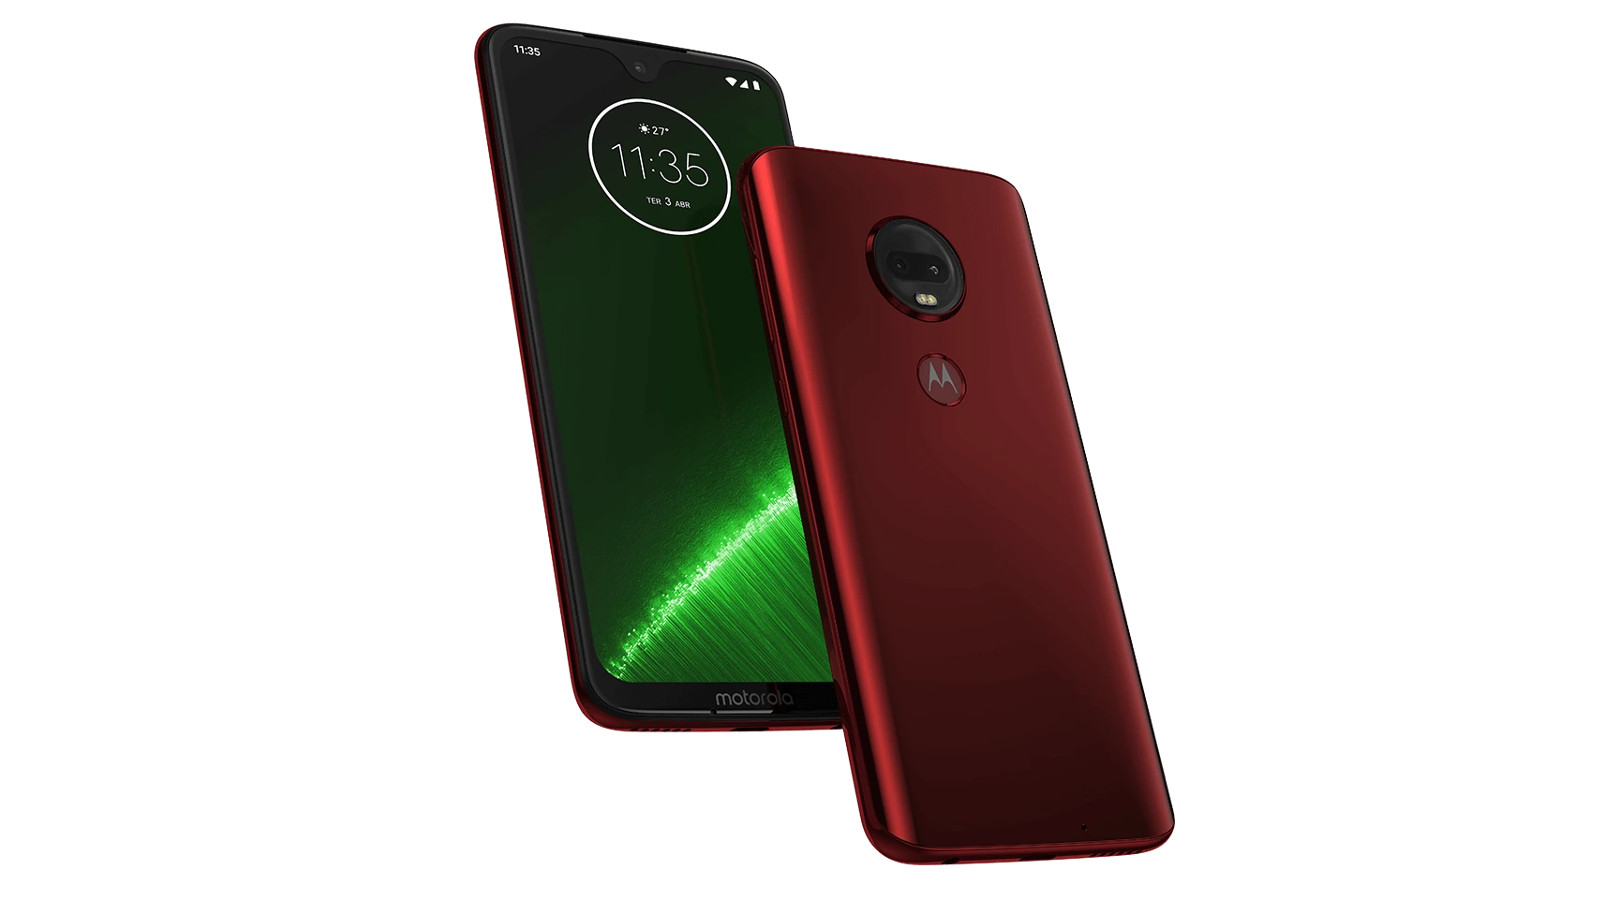 A render apparently showing the Moto G7 Plus with price starting at $$.